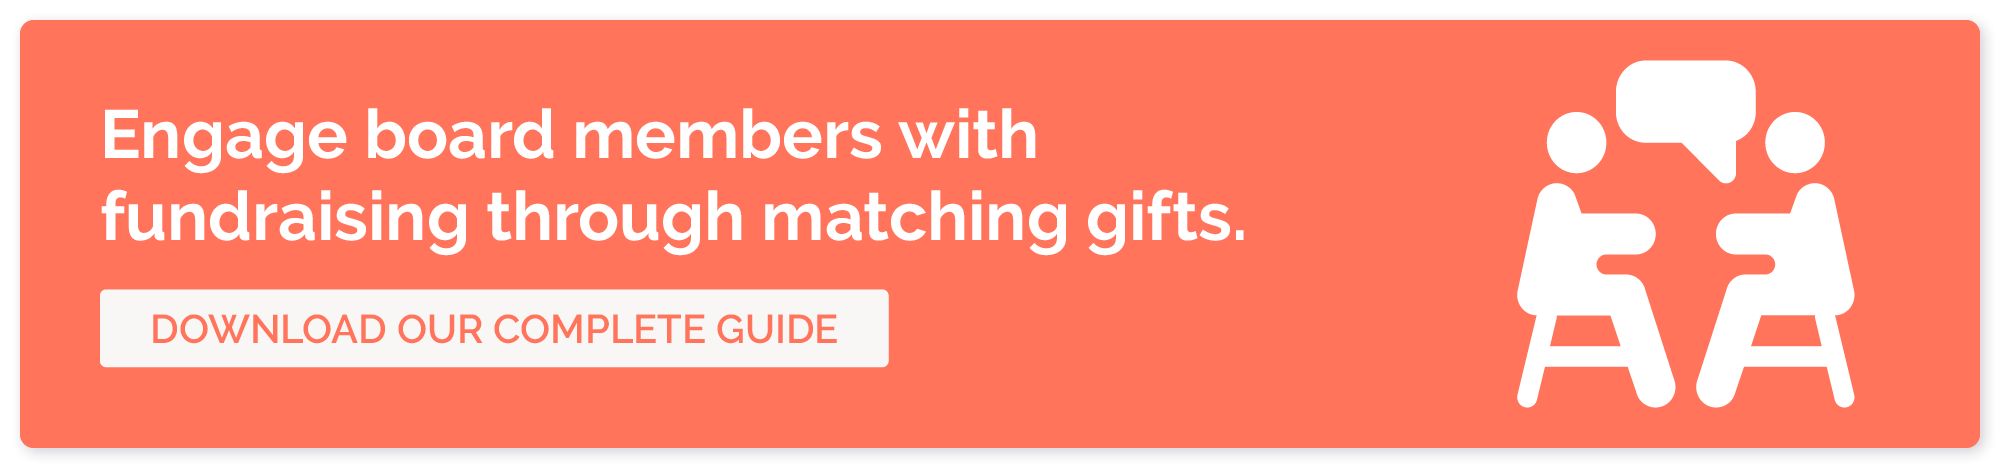 Click to download our guide to matching gifts to learn how to secure your board members’ engagement in fundraising.